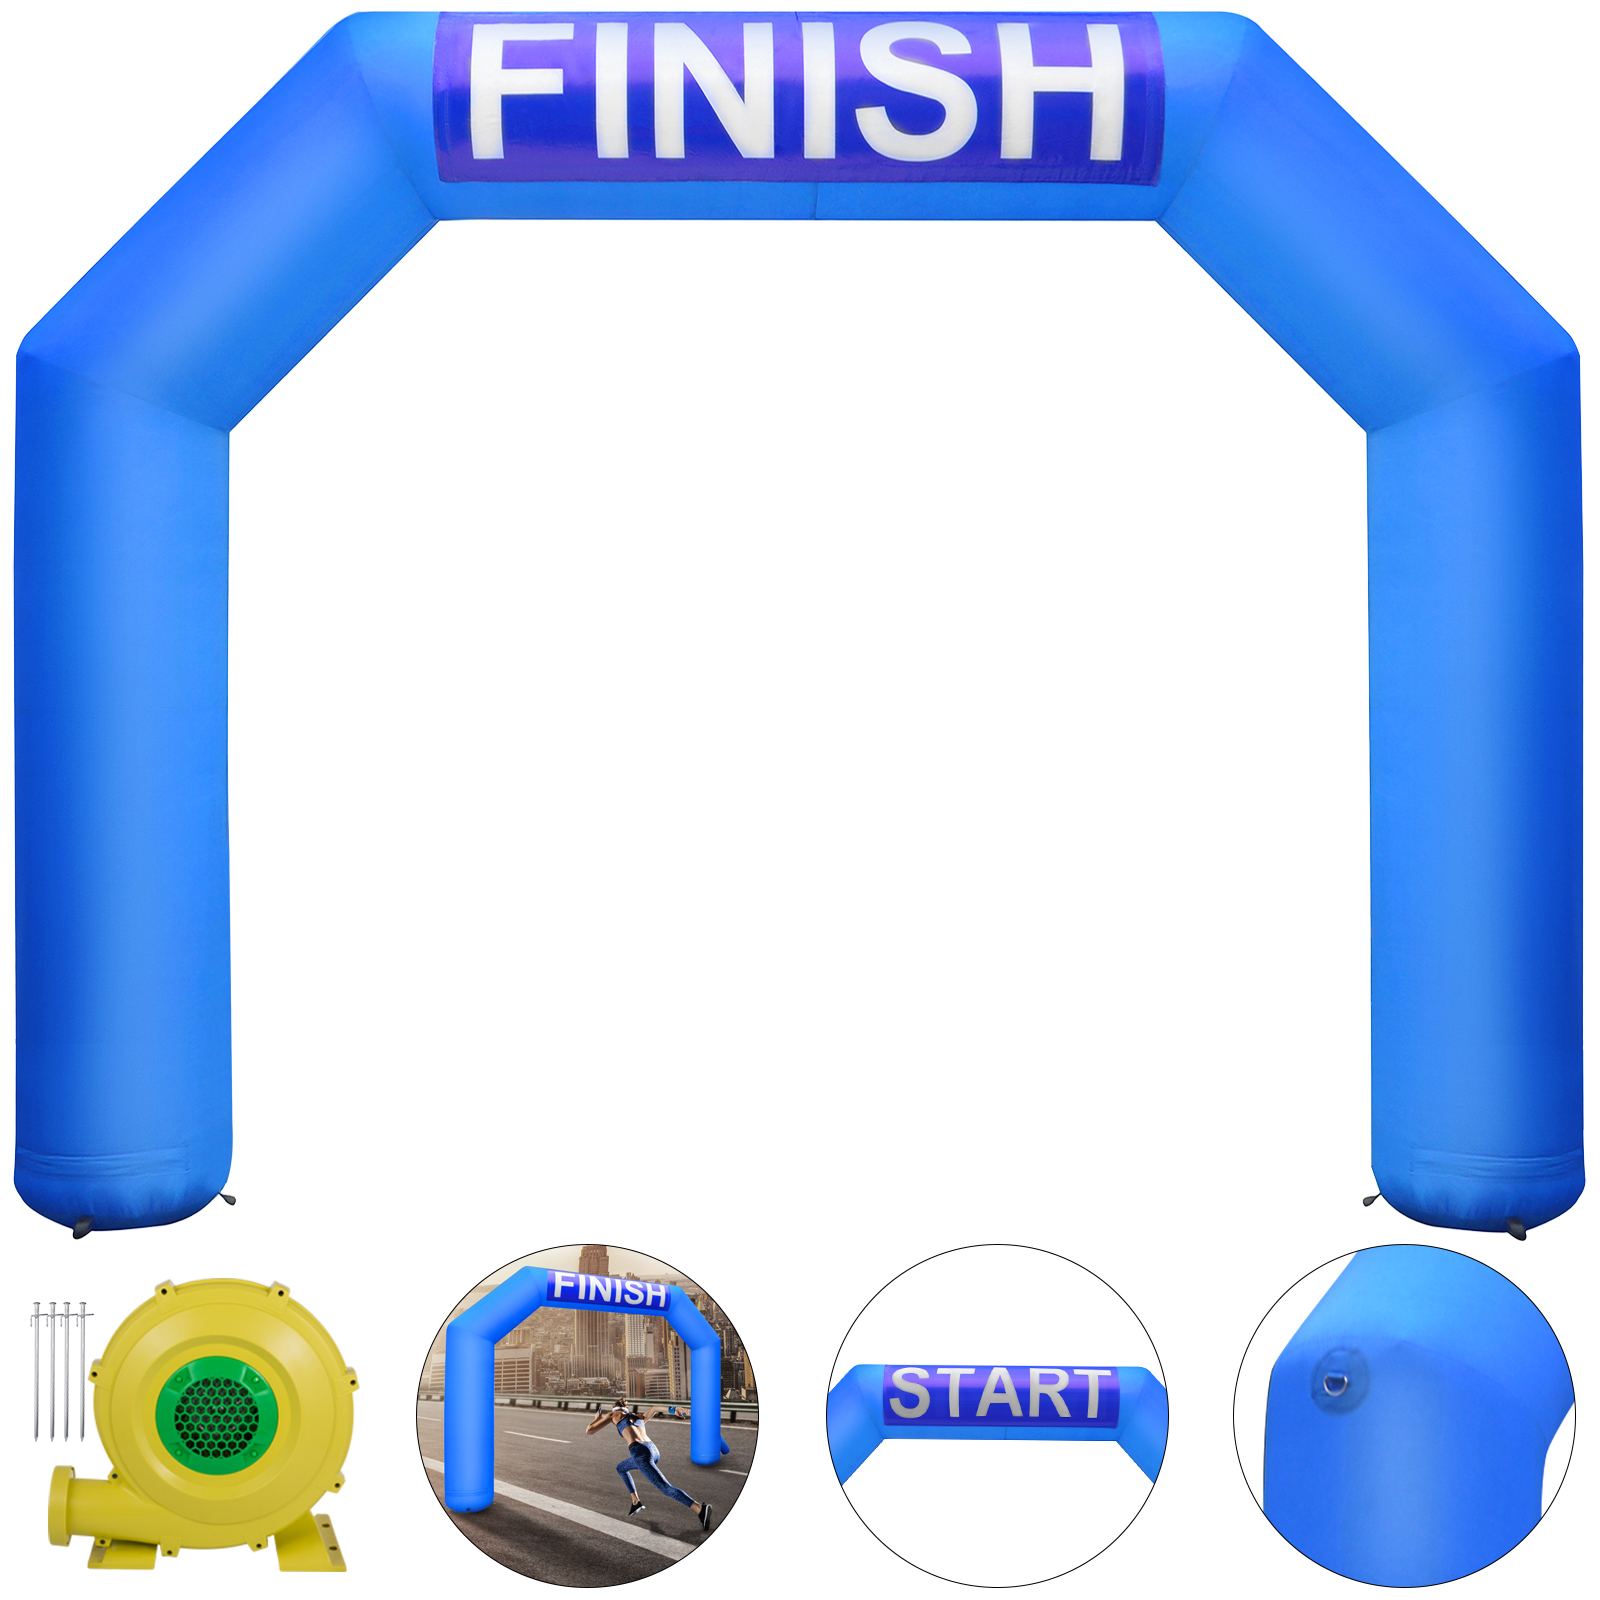 Custom-made Item---inflatable Arch Advertising Sales Promotion Arch Start Finish от Vevor Many GEOs